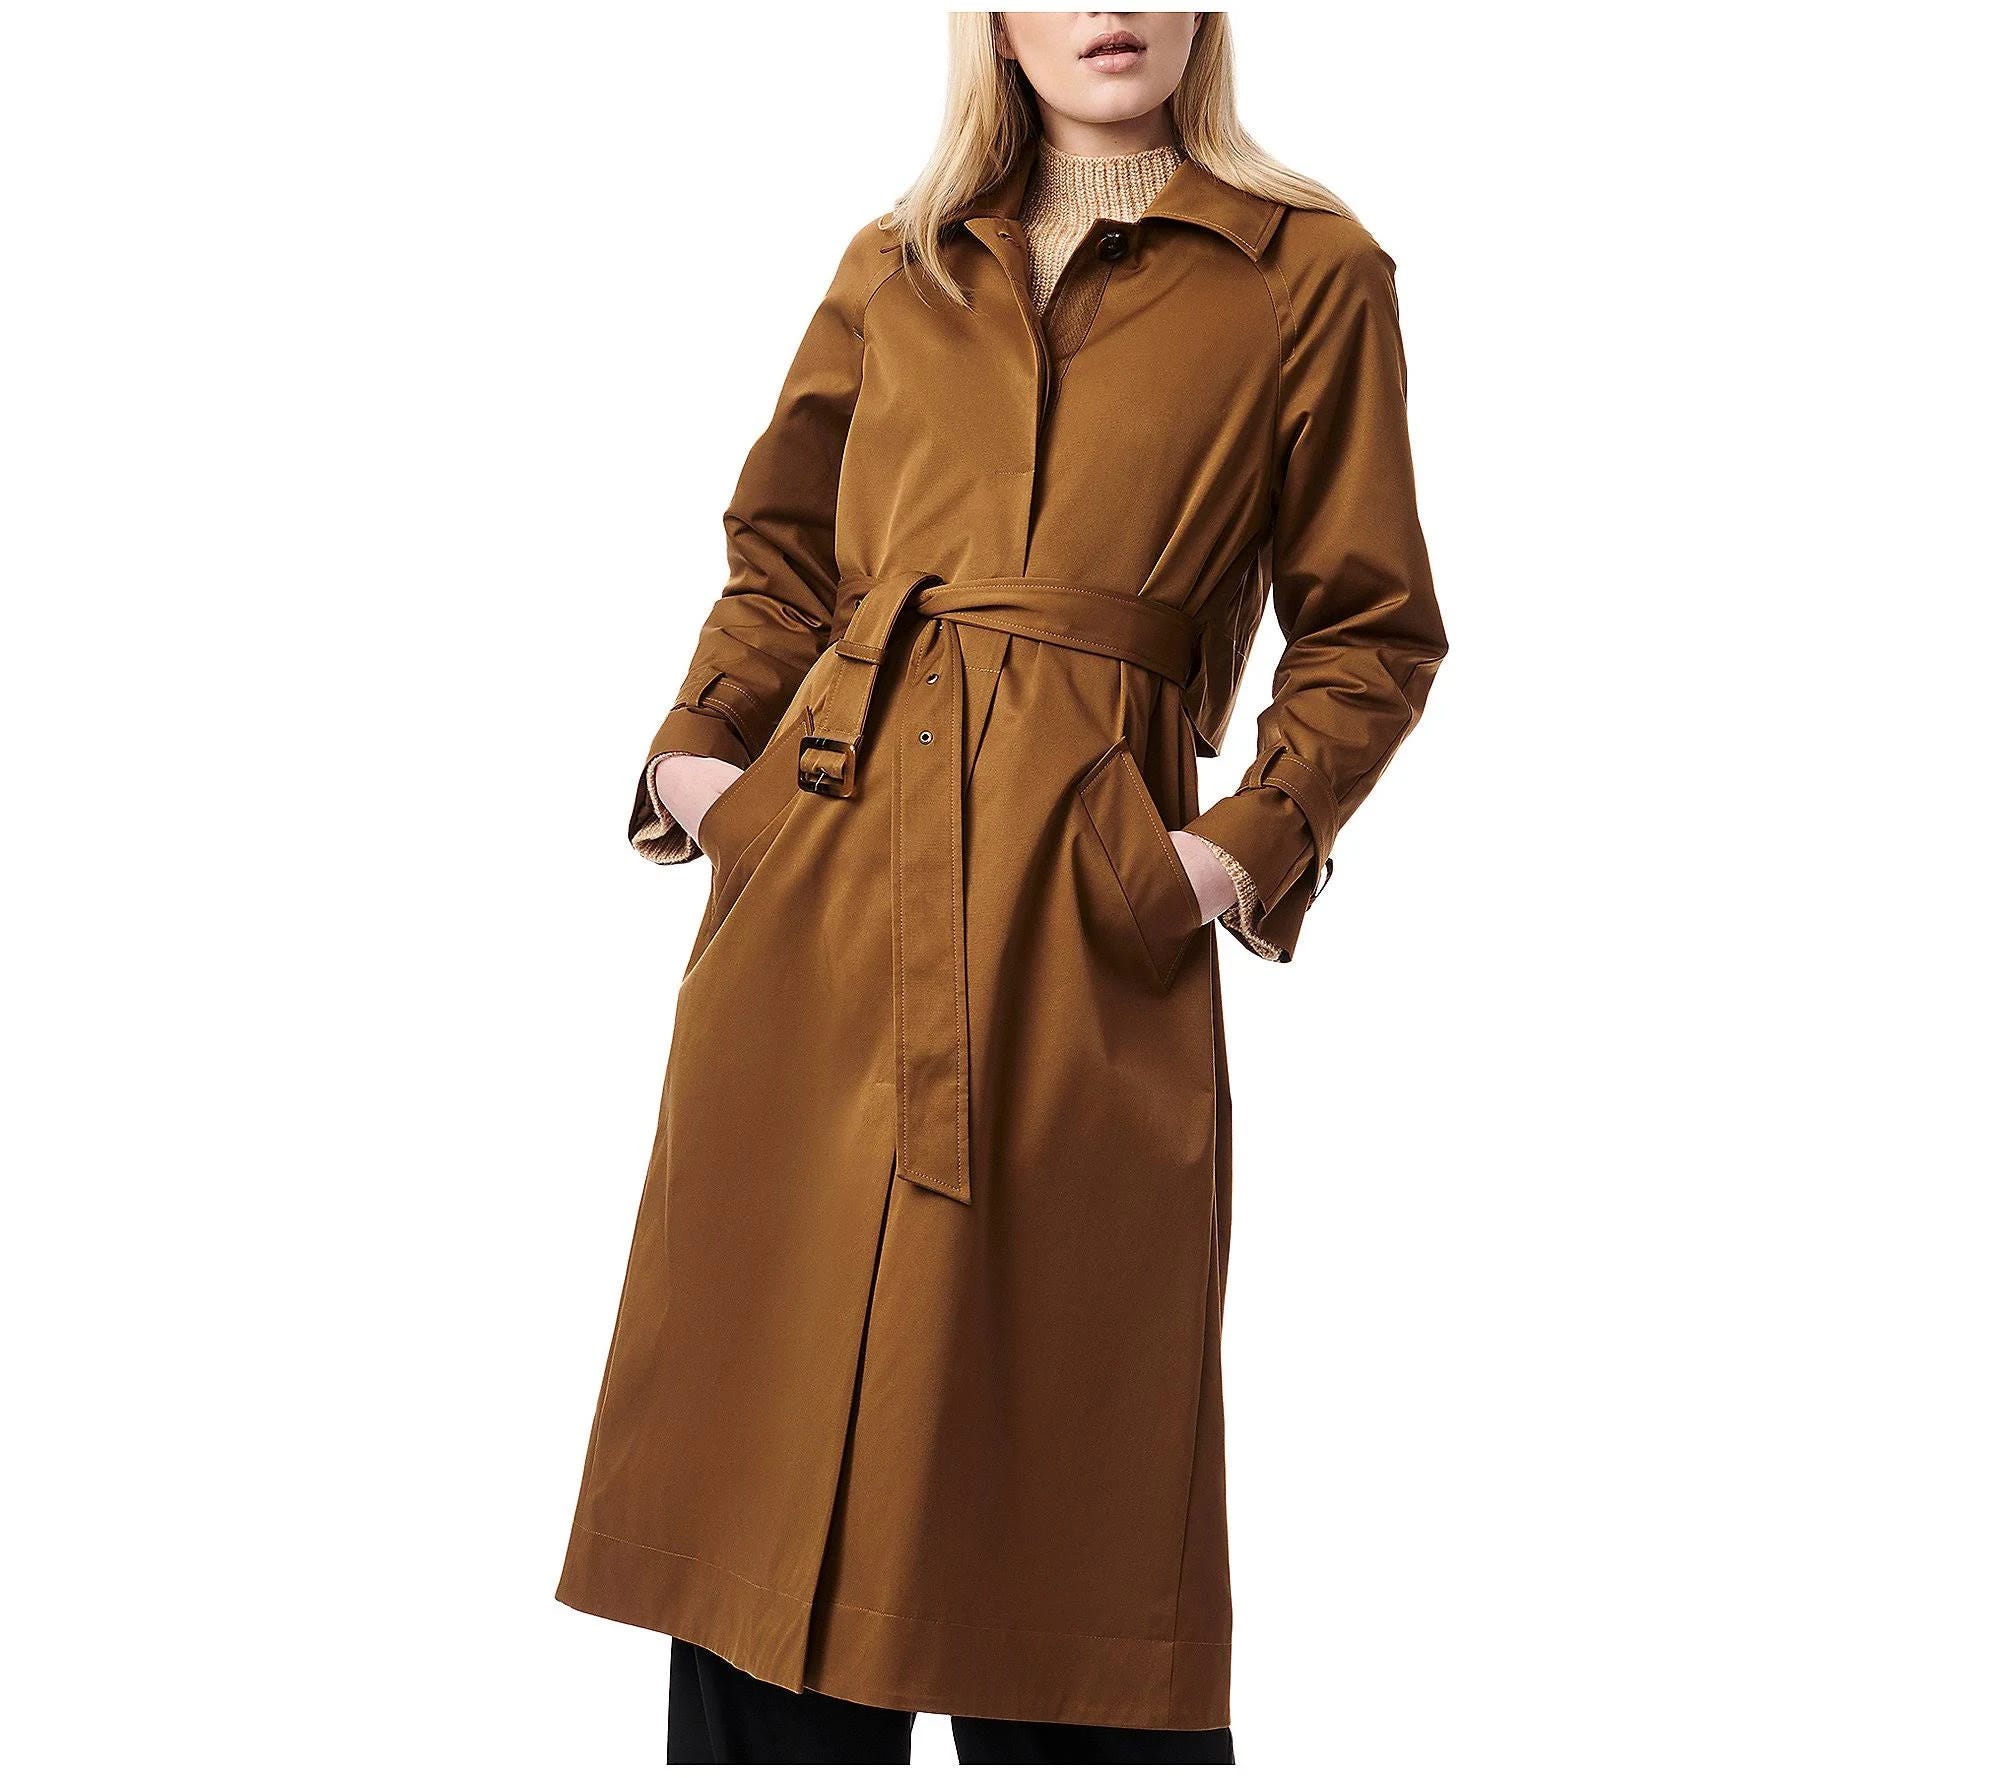 Modern Light Brown Trench Coat with Hidden Button Closure | Image